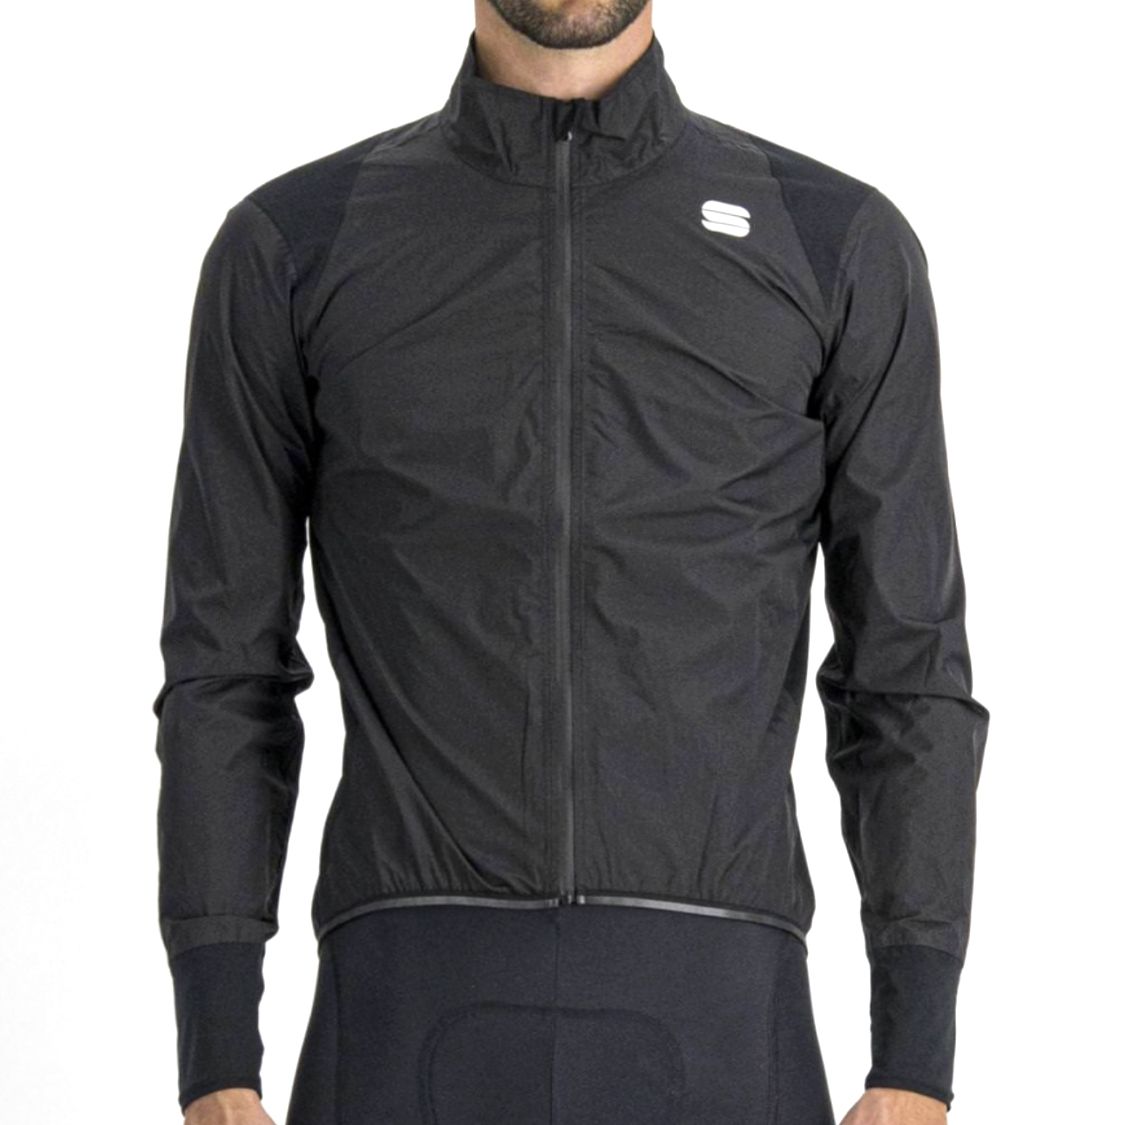 Best cycling clothing brands: Our pick of the top companies making ...